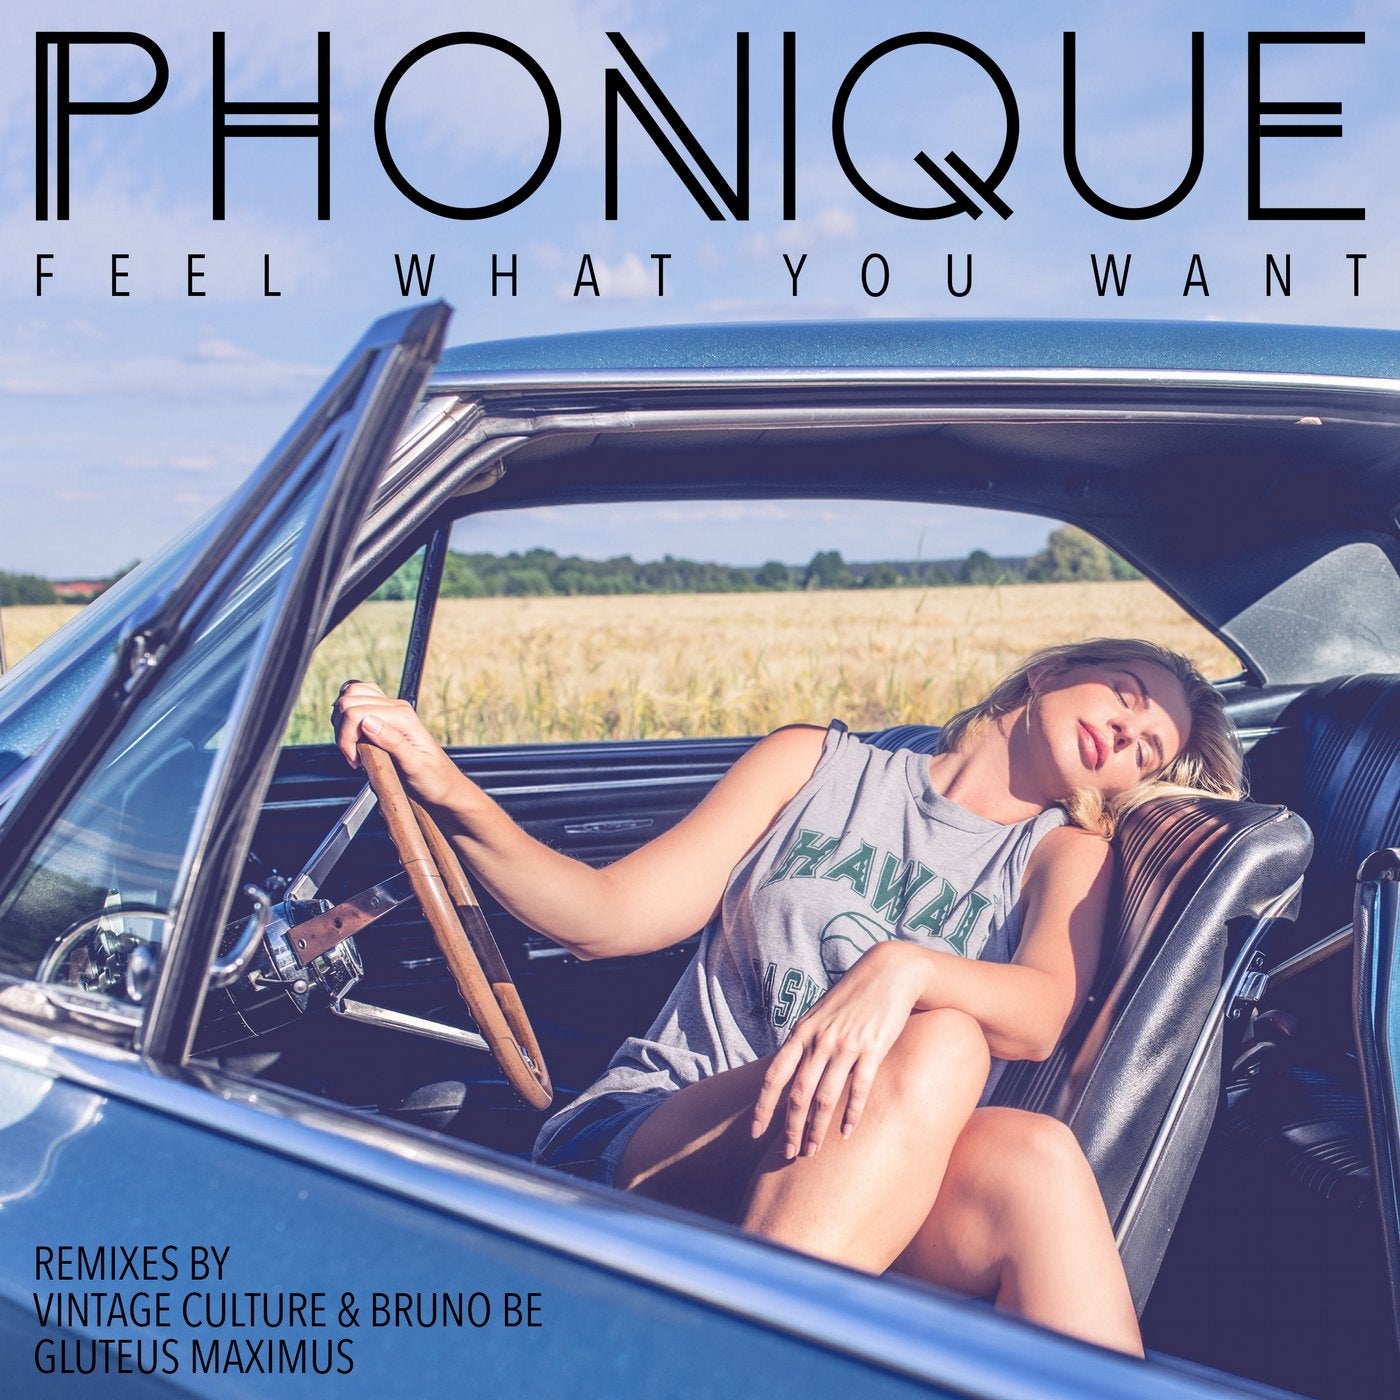 Feel What You Want - Vintage Culture & Bruno Be and Gluteus Maximus Remixes